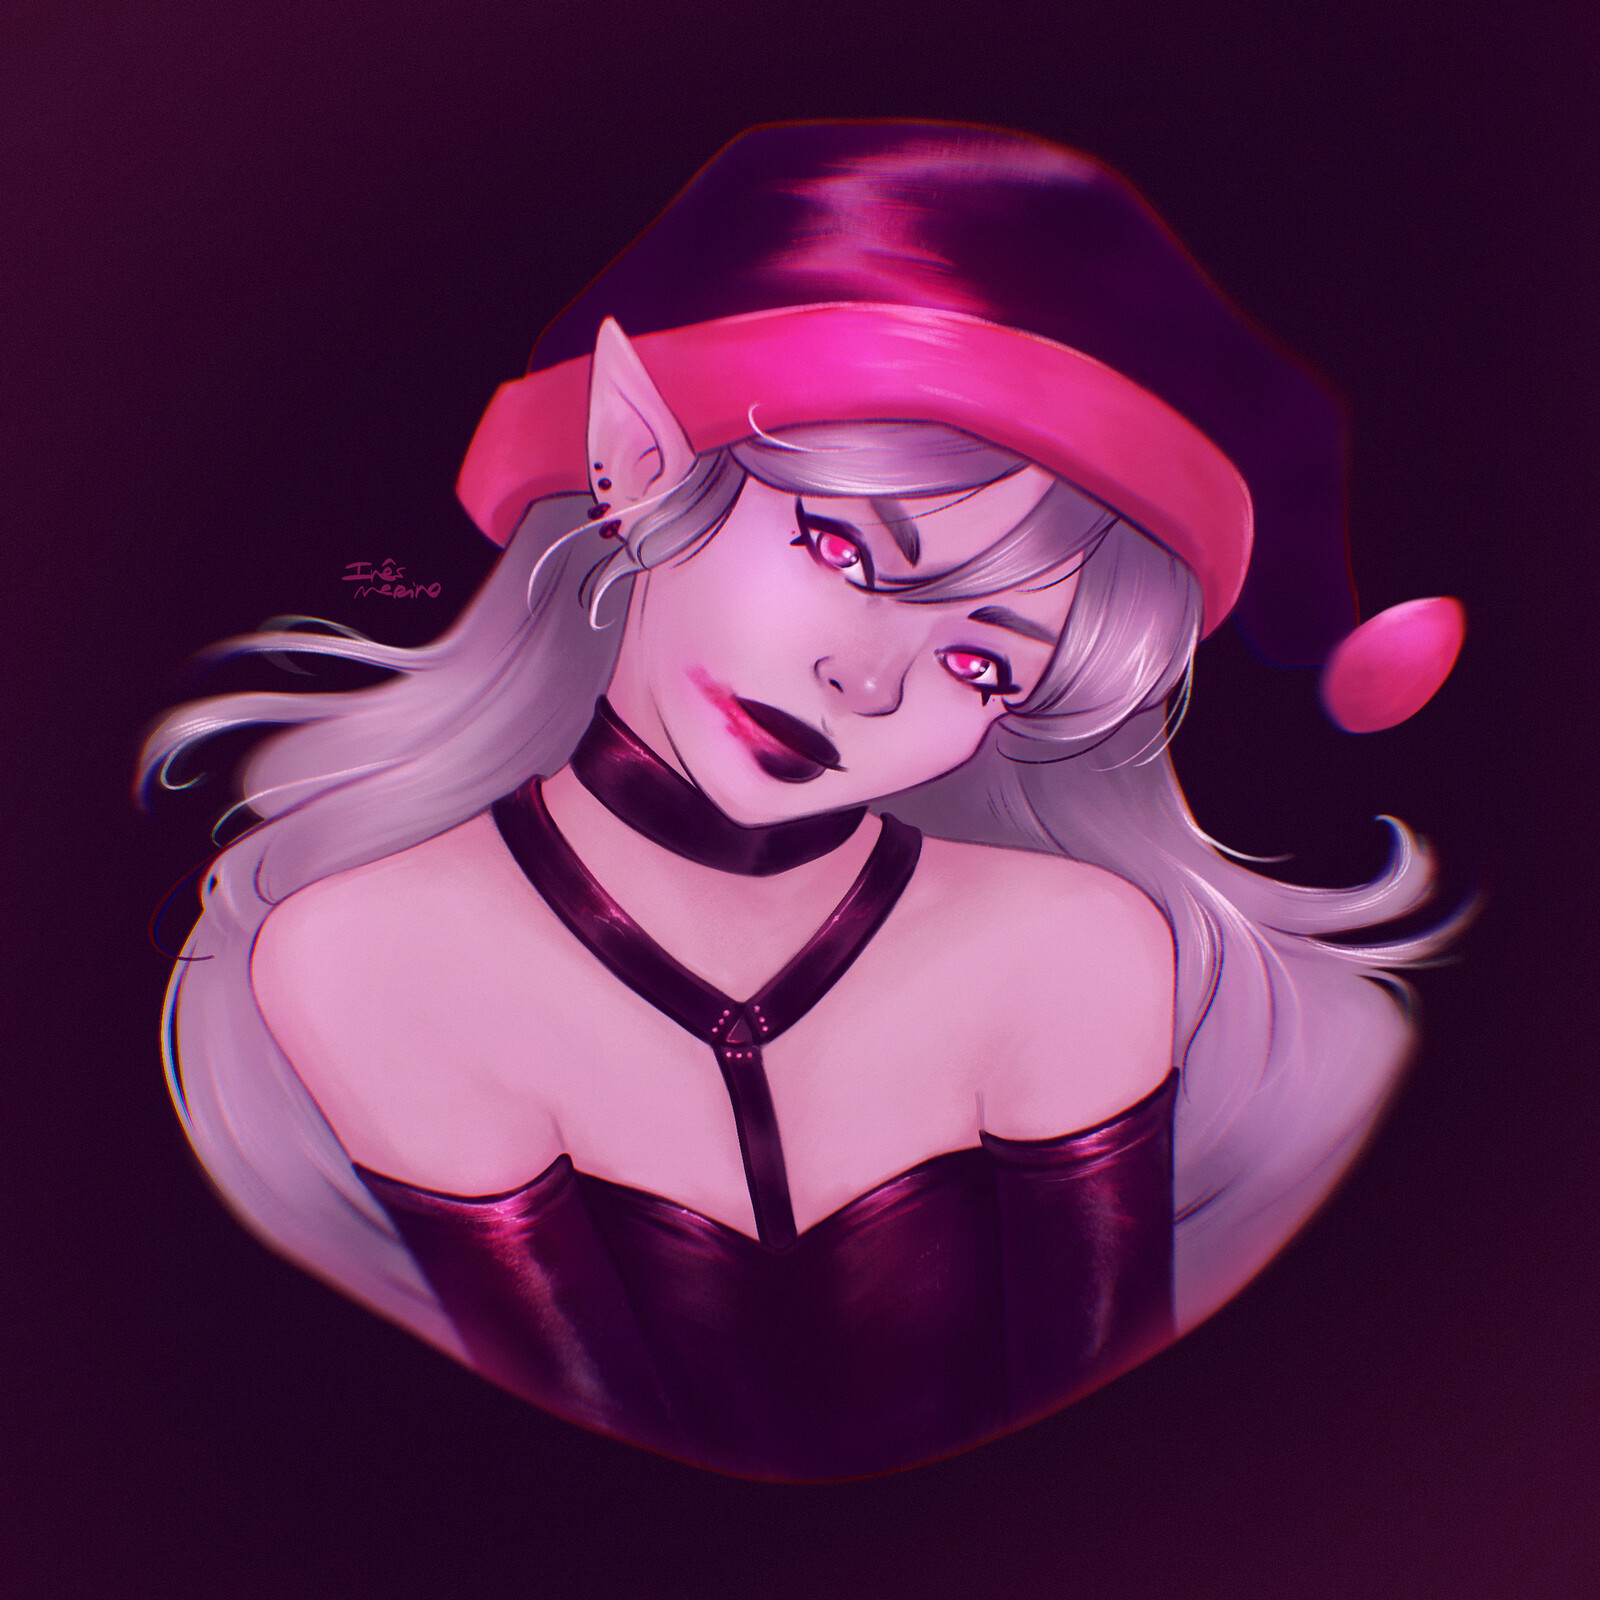 Mauve is the blood thirst version of Crimson. She's a special kind of vampire, feeding on darkness and transmuting it. You are sure to be guided through the depths when she finds you lost.